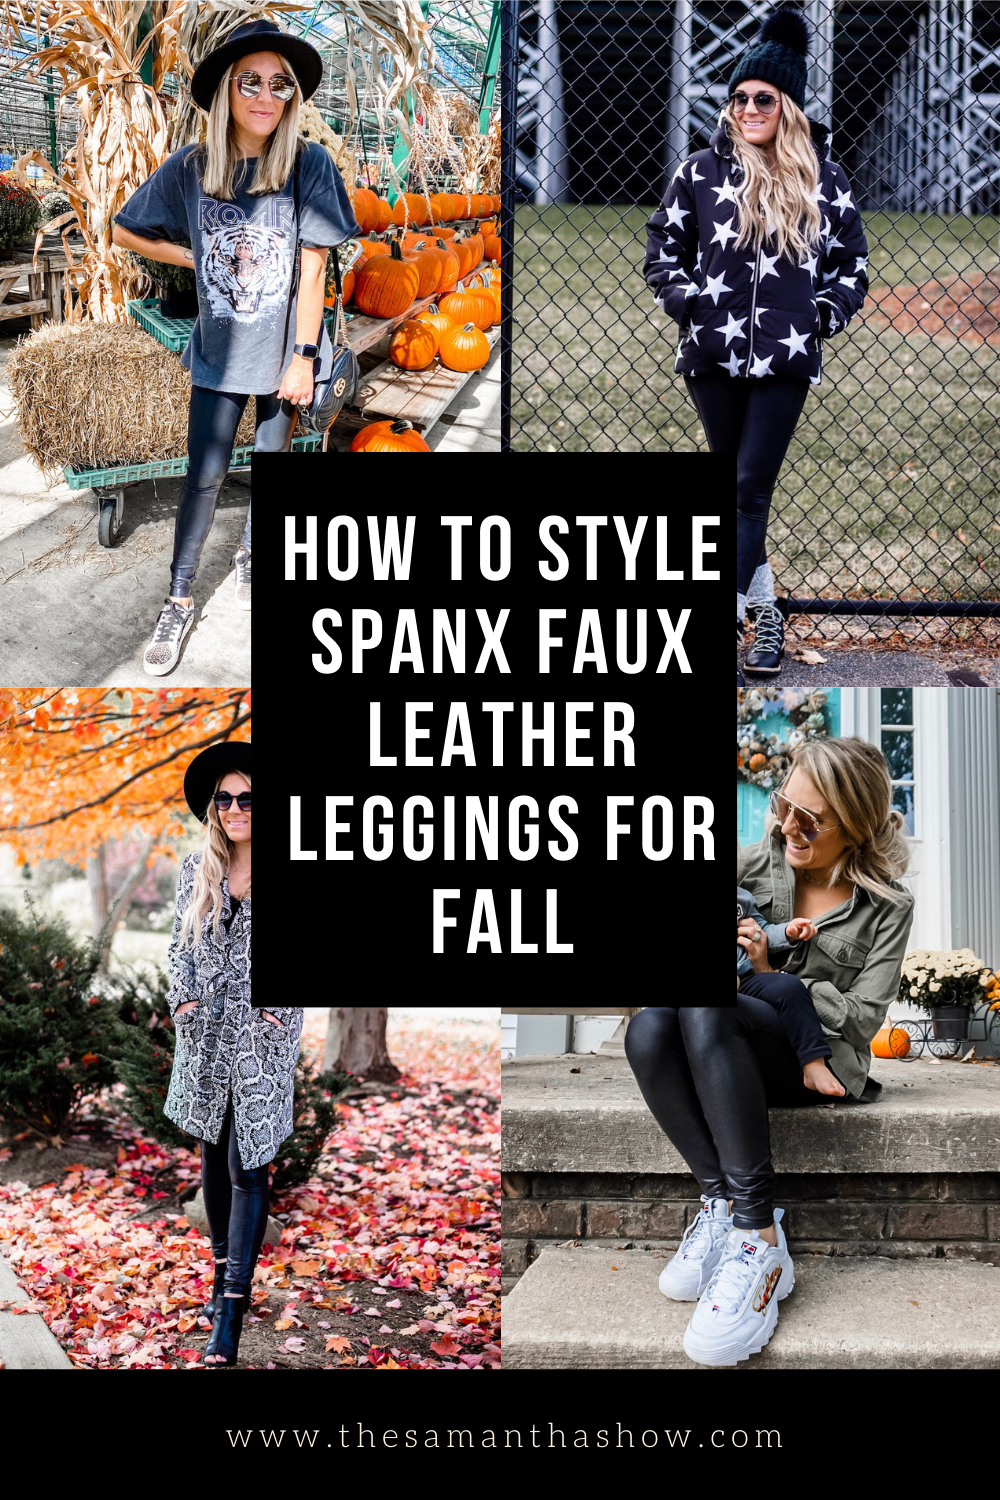 How to style Spanx faux leather leggings for fall - The Samantha